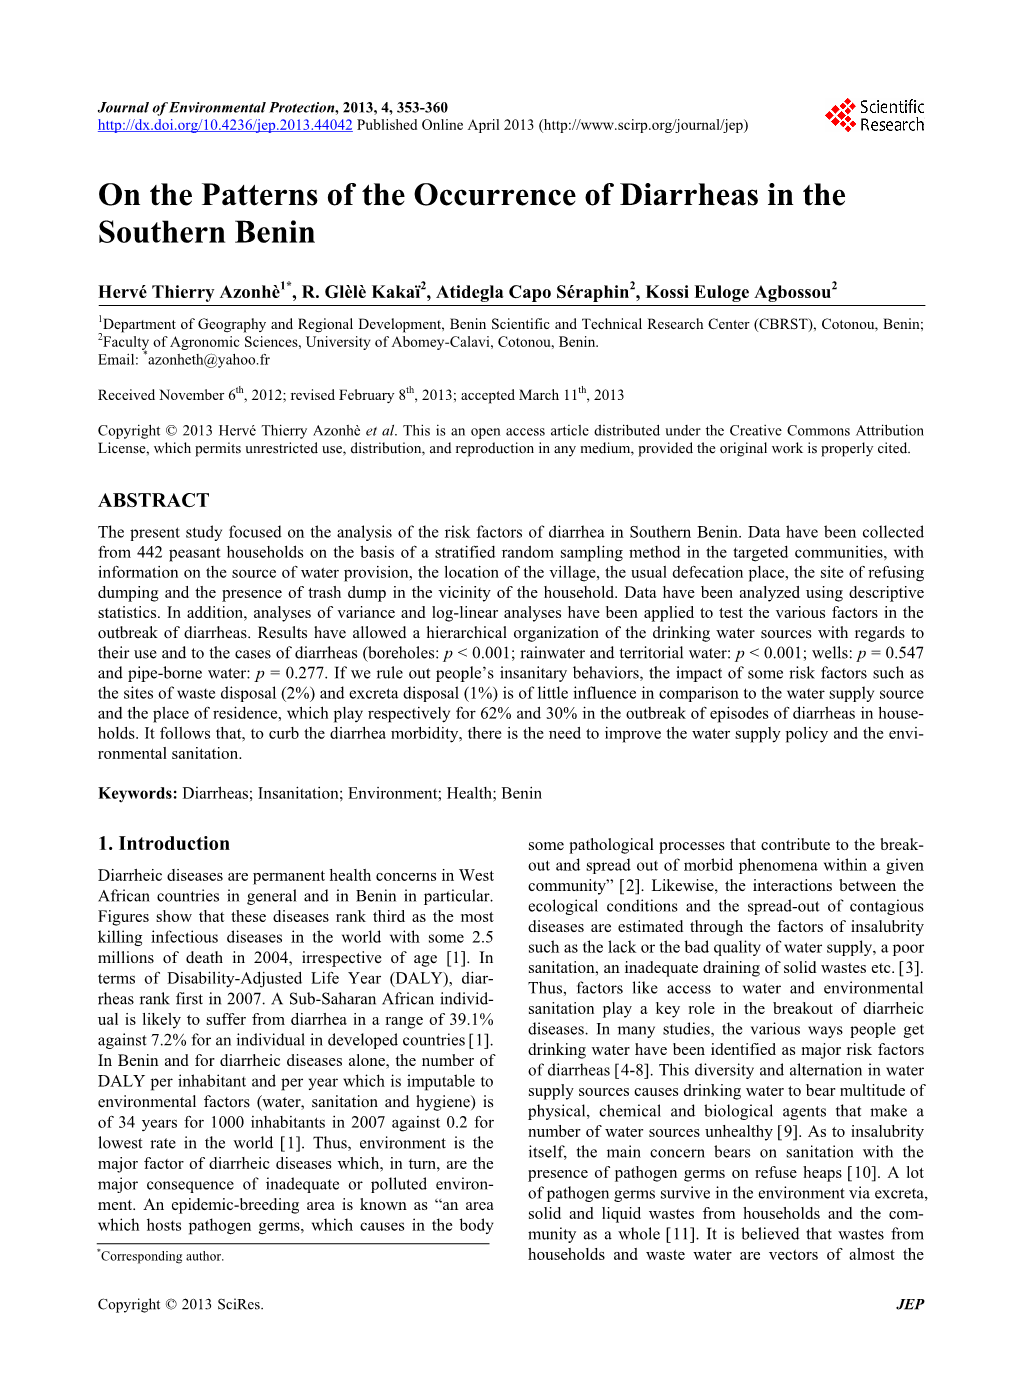 On the Patterns of the Occurrence of Diarrheas in the Southern Benin